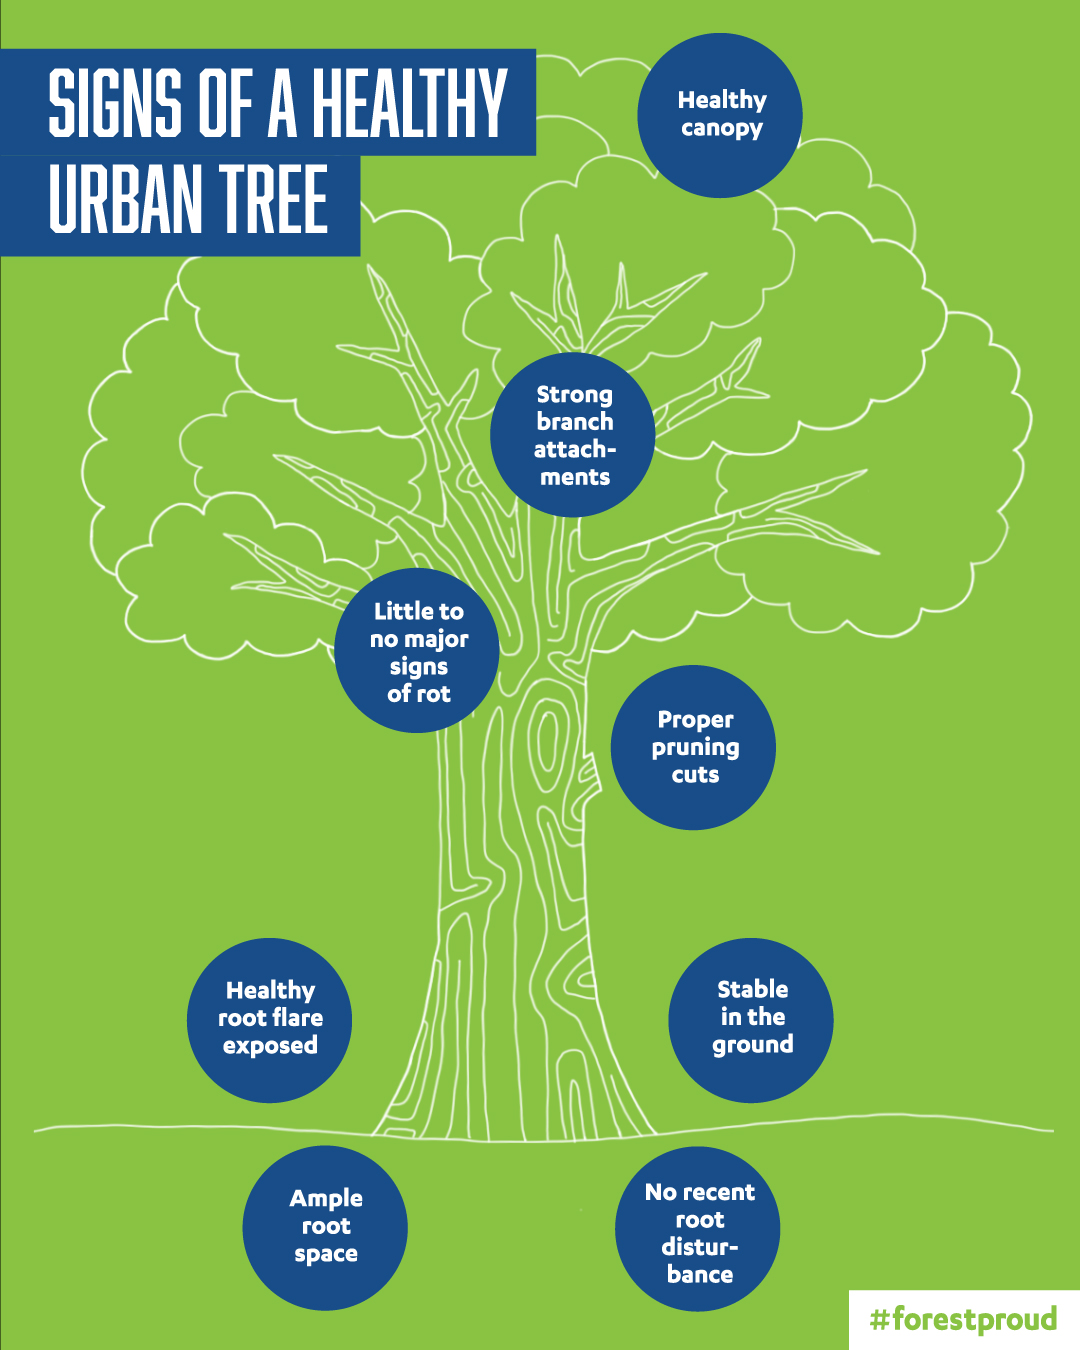 Signs of a Healthy Urban Tree